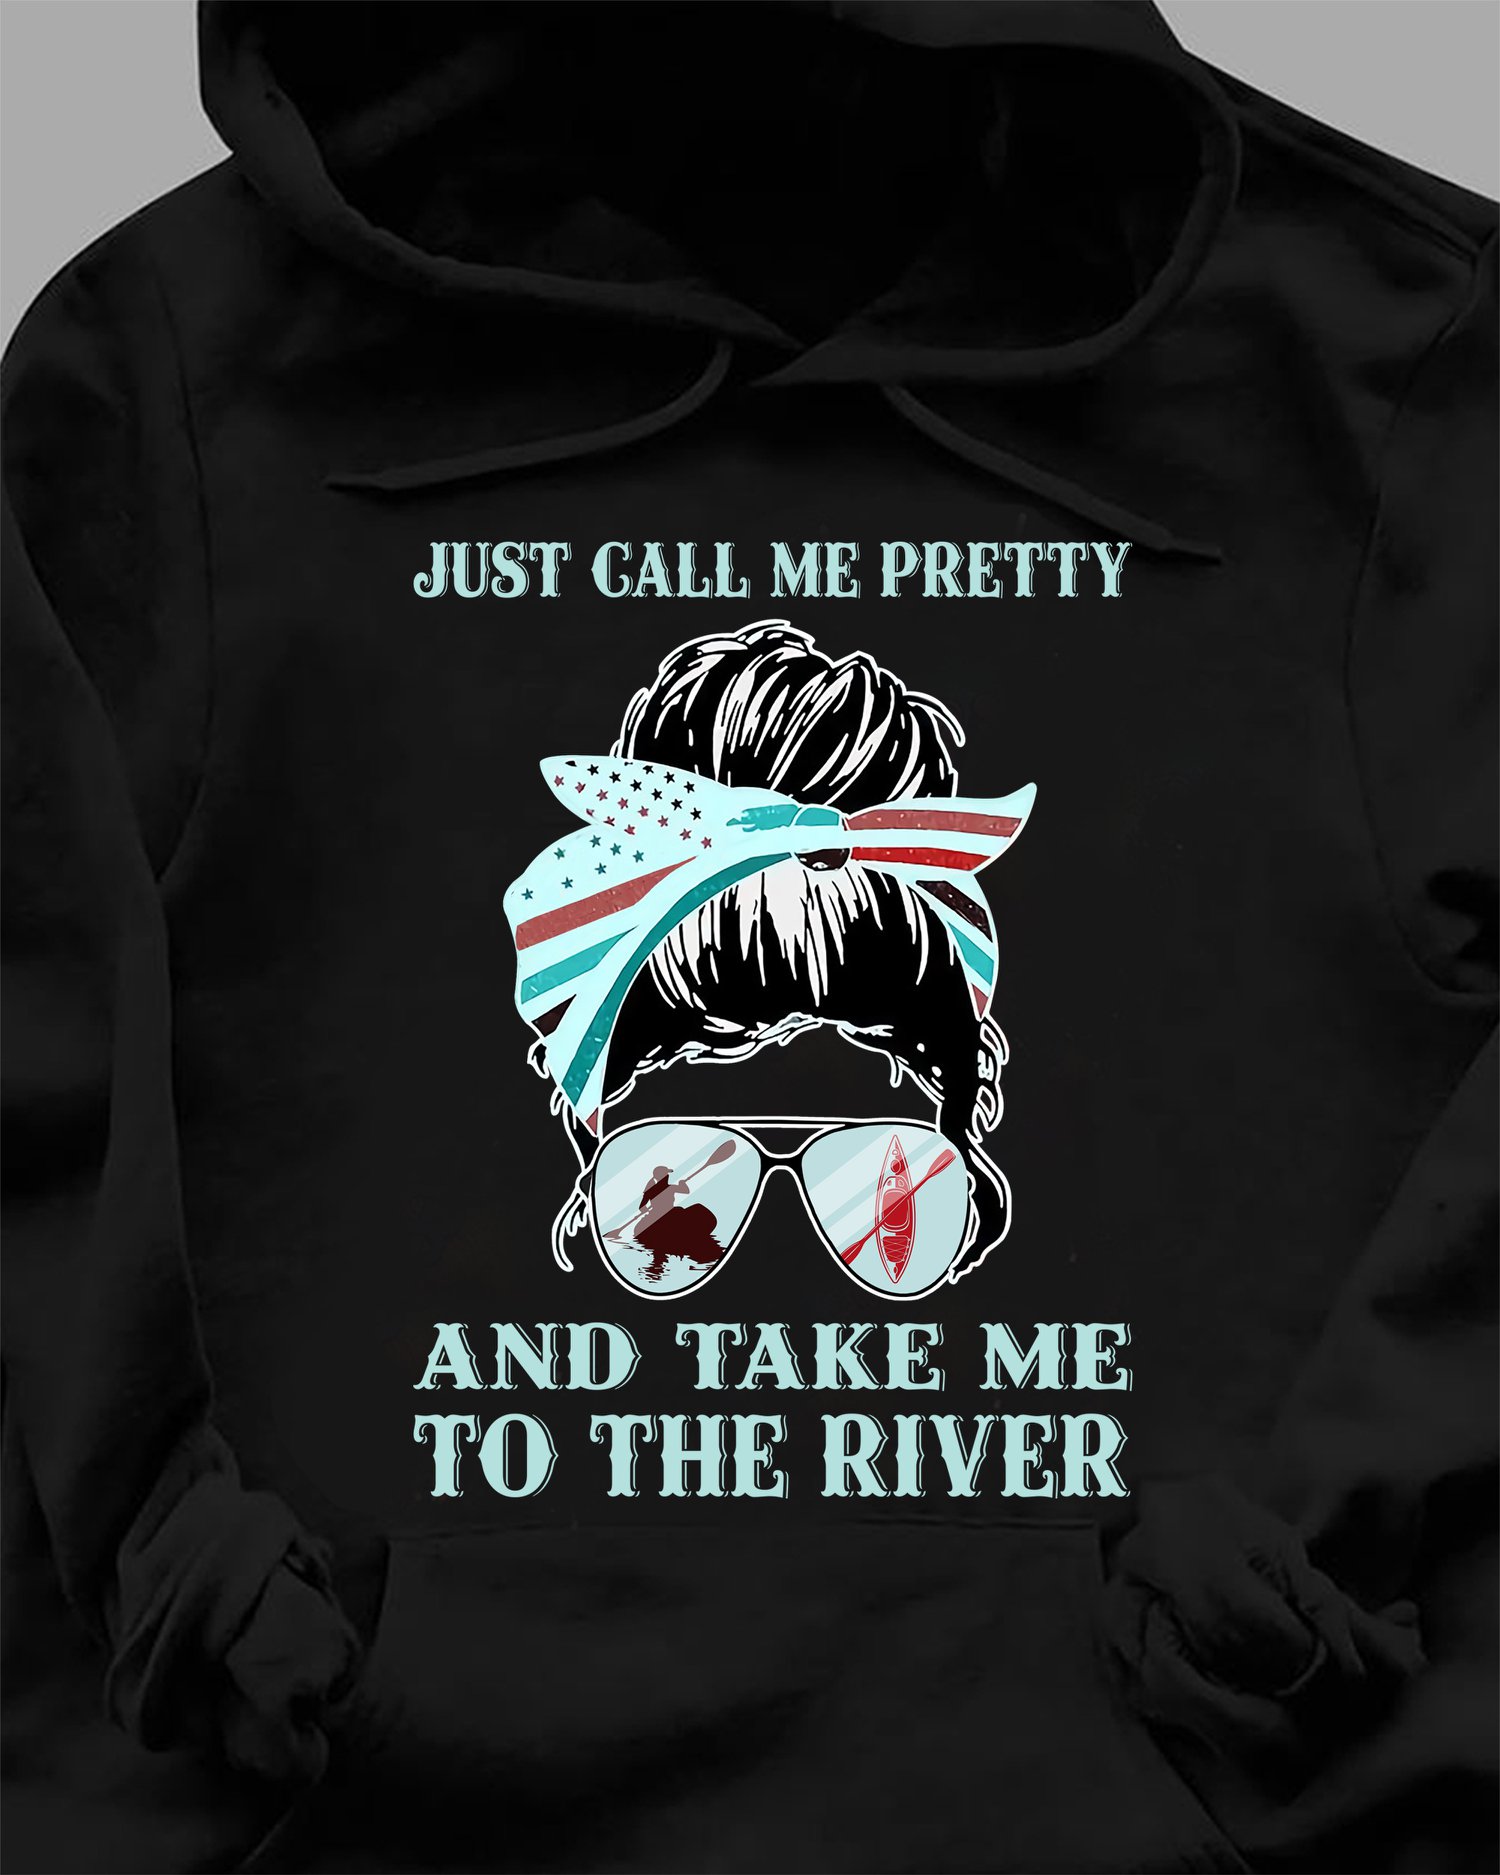 Just call me pretty and take me to the river - Love kayaking, woman face